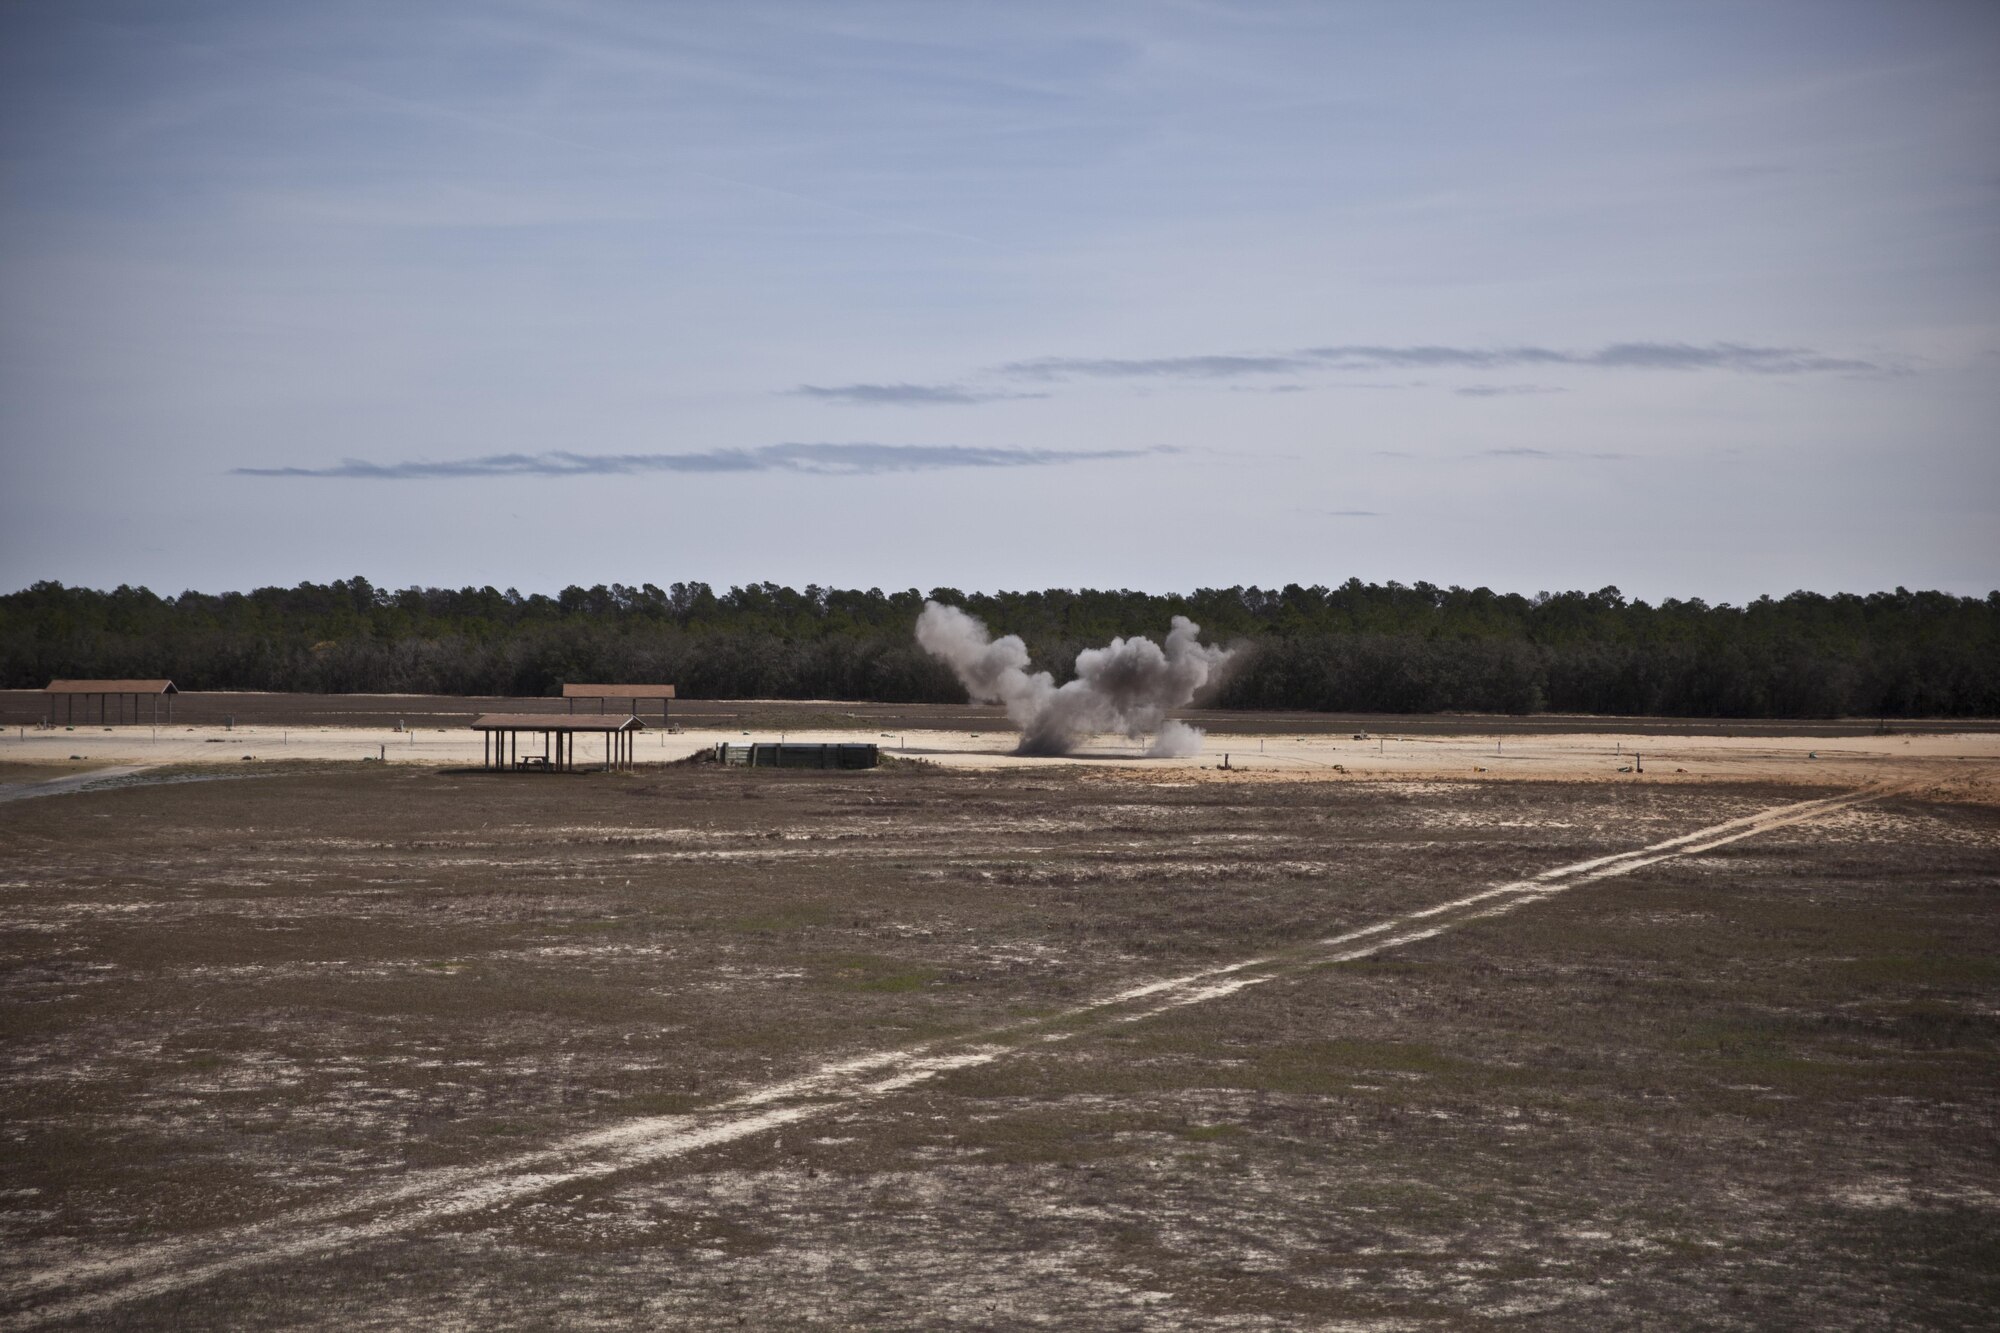 U.S. service members attending Naval School Explosive Ordnance Disposal (NAVSCOLEOD) conduct live fire explosive training at Eglin Air Force Base, Fla., March 8, 2017. The purpose of NAVSCOLEOD is to train technicians in basic, as well as advanced, courses to perform various duties that include locating, identifying, rendering safe, and disposing of bombs and other hazardous materials. (U.S. Marine Corps photo by Cpl. Laura Mercado)